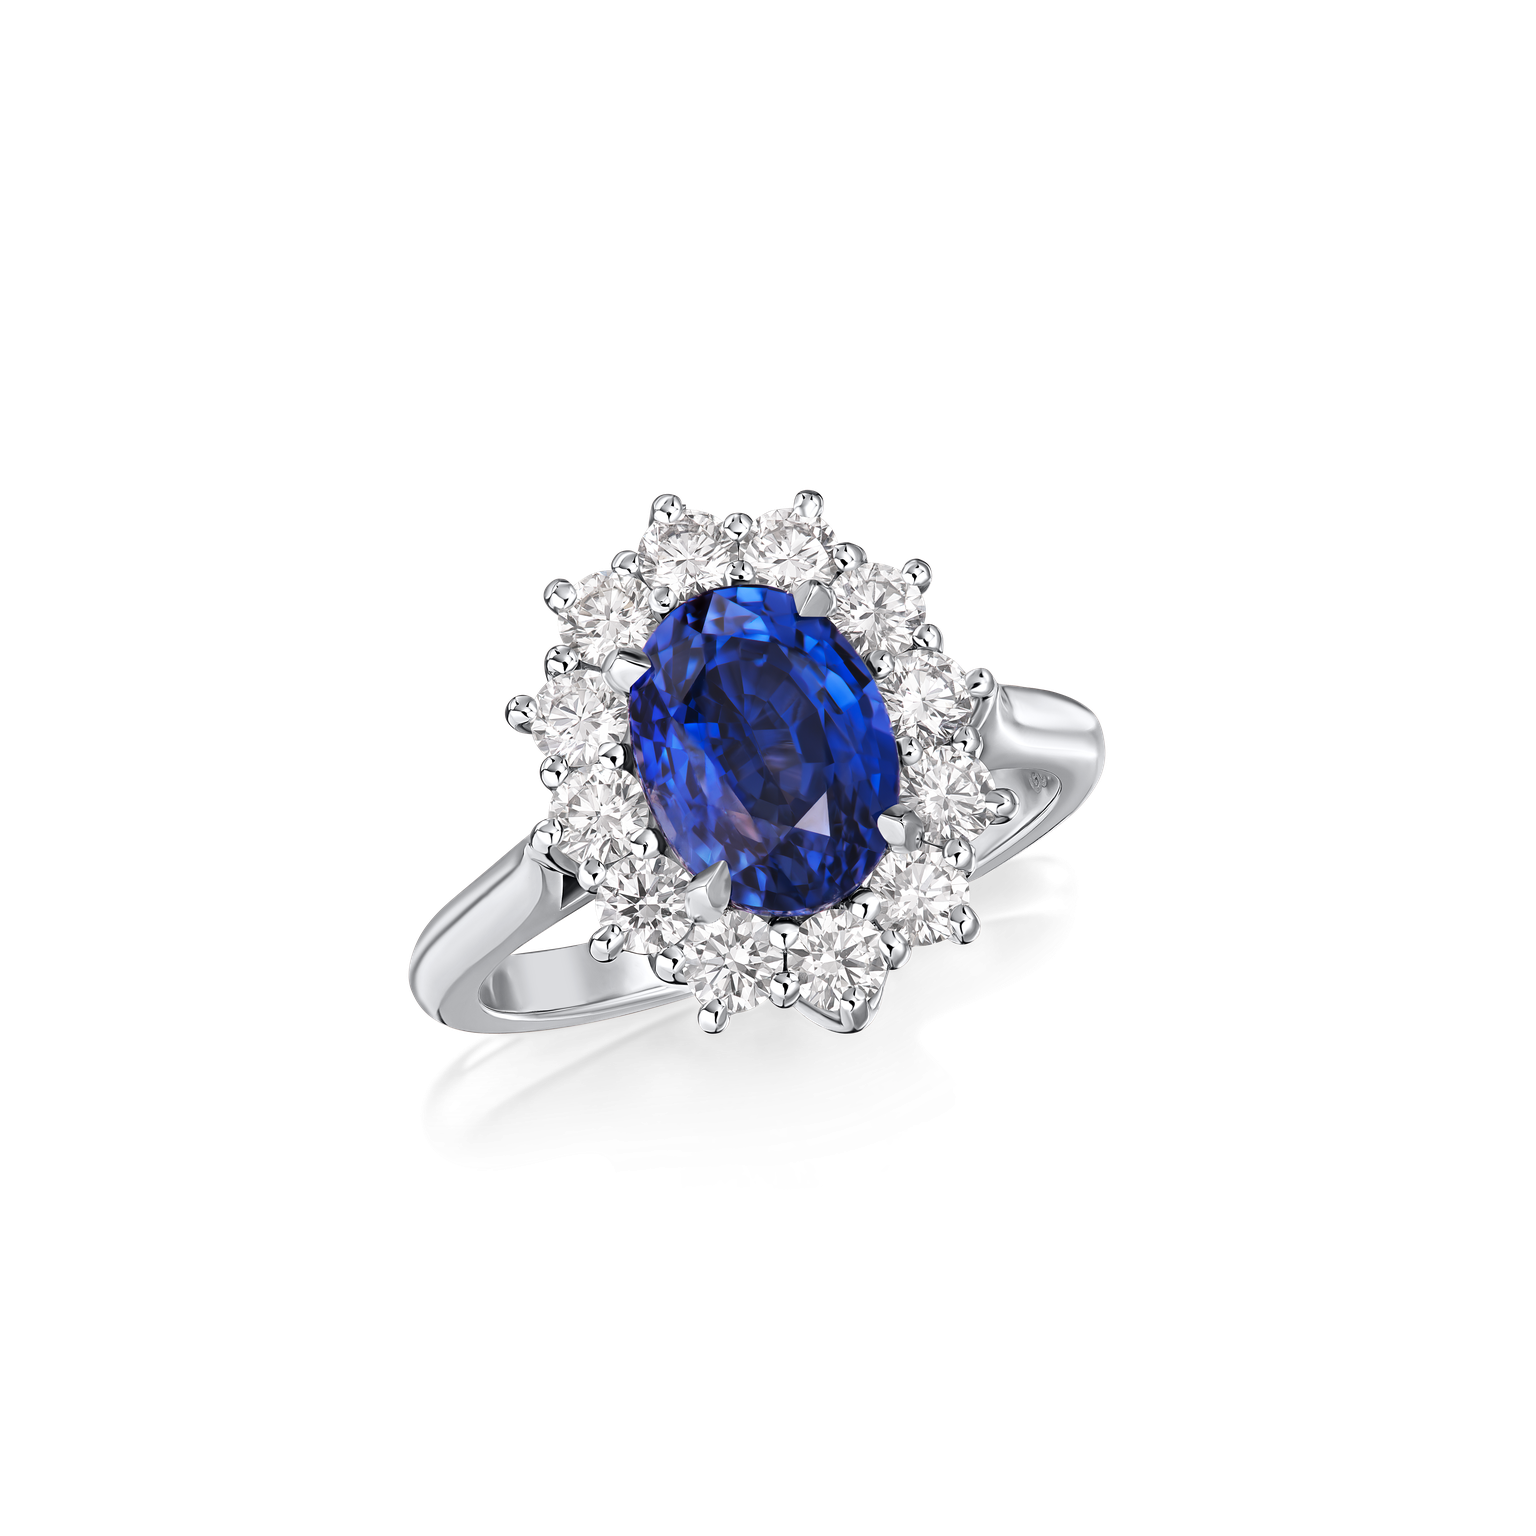 3.18cts Sapphire and Diamond Ring